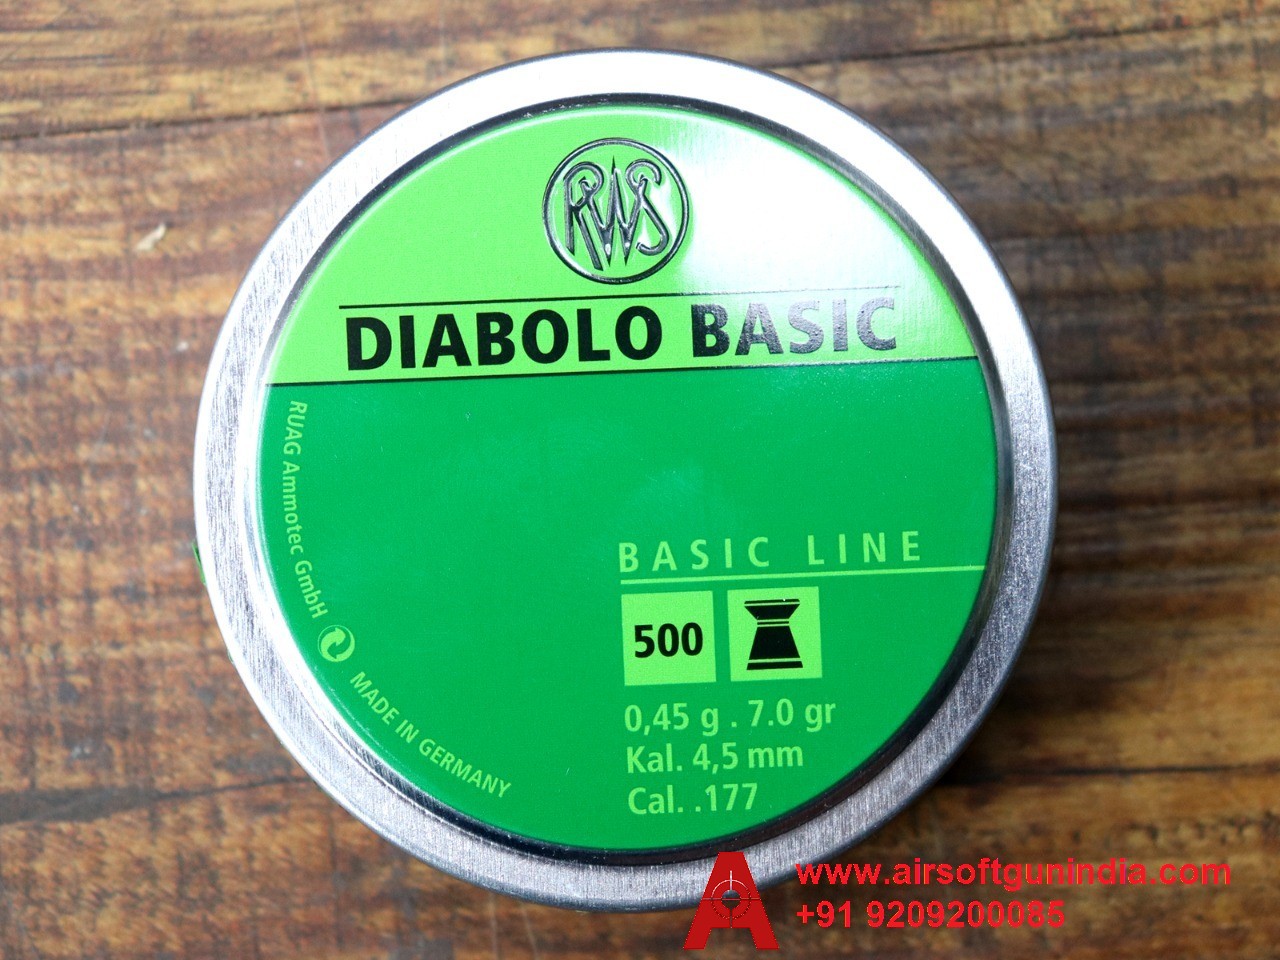 .177 RWS Diabolo Basic, Imported Pellet Pack Of 4 BY Airsoft Gun India